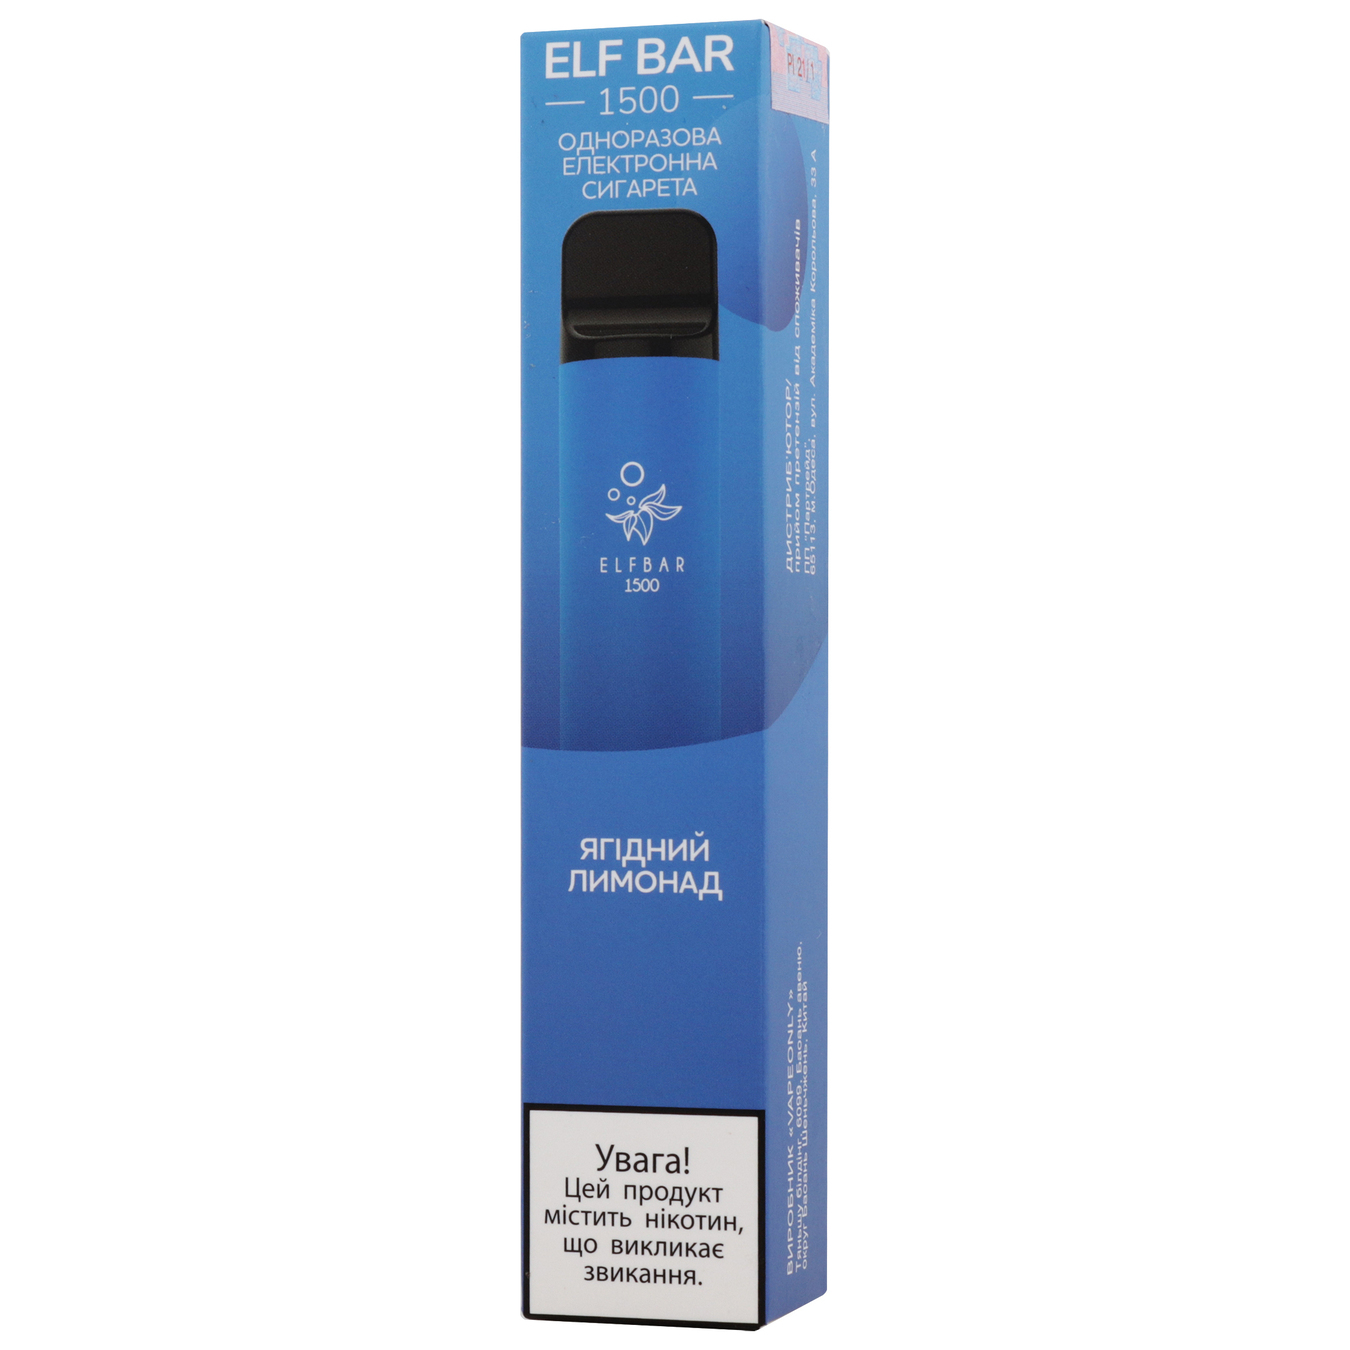 Elf Bar Electronic vaporizer berry lemonade 5% 4.8 ml (the price is indicated without excise tax)